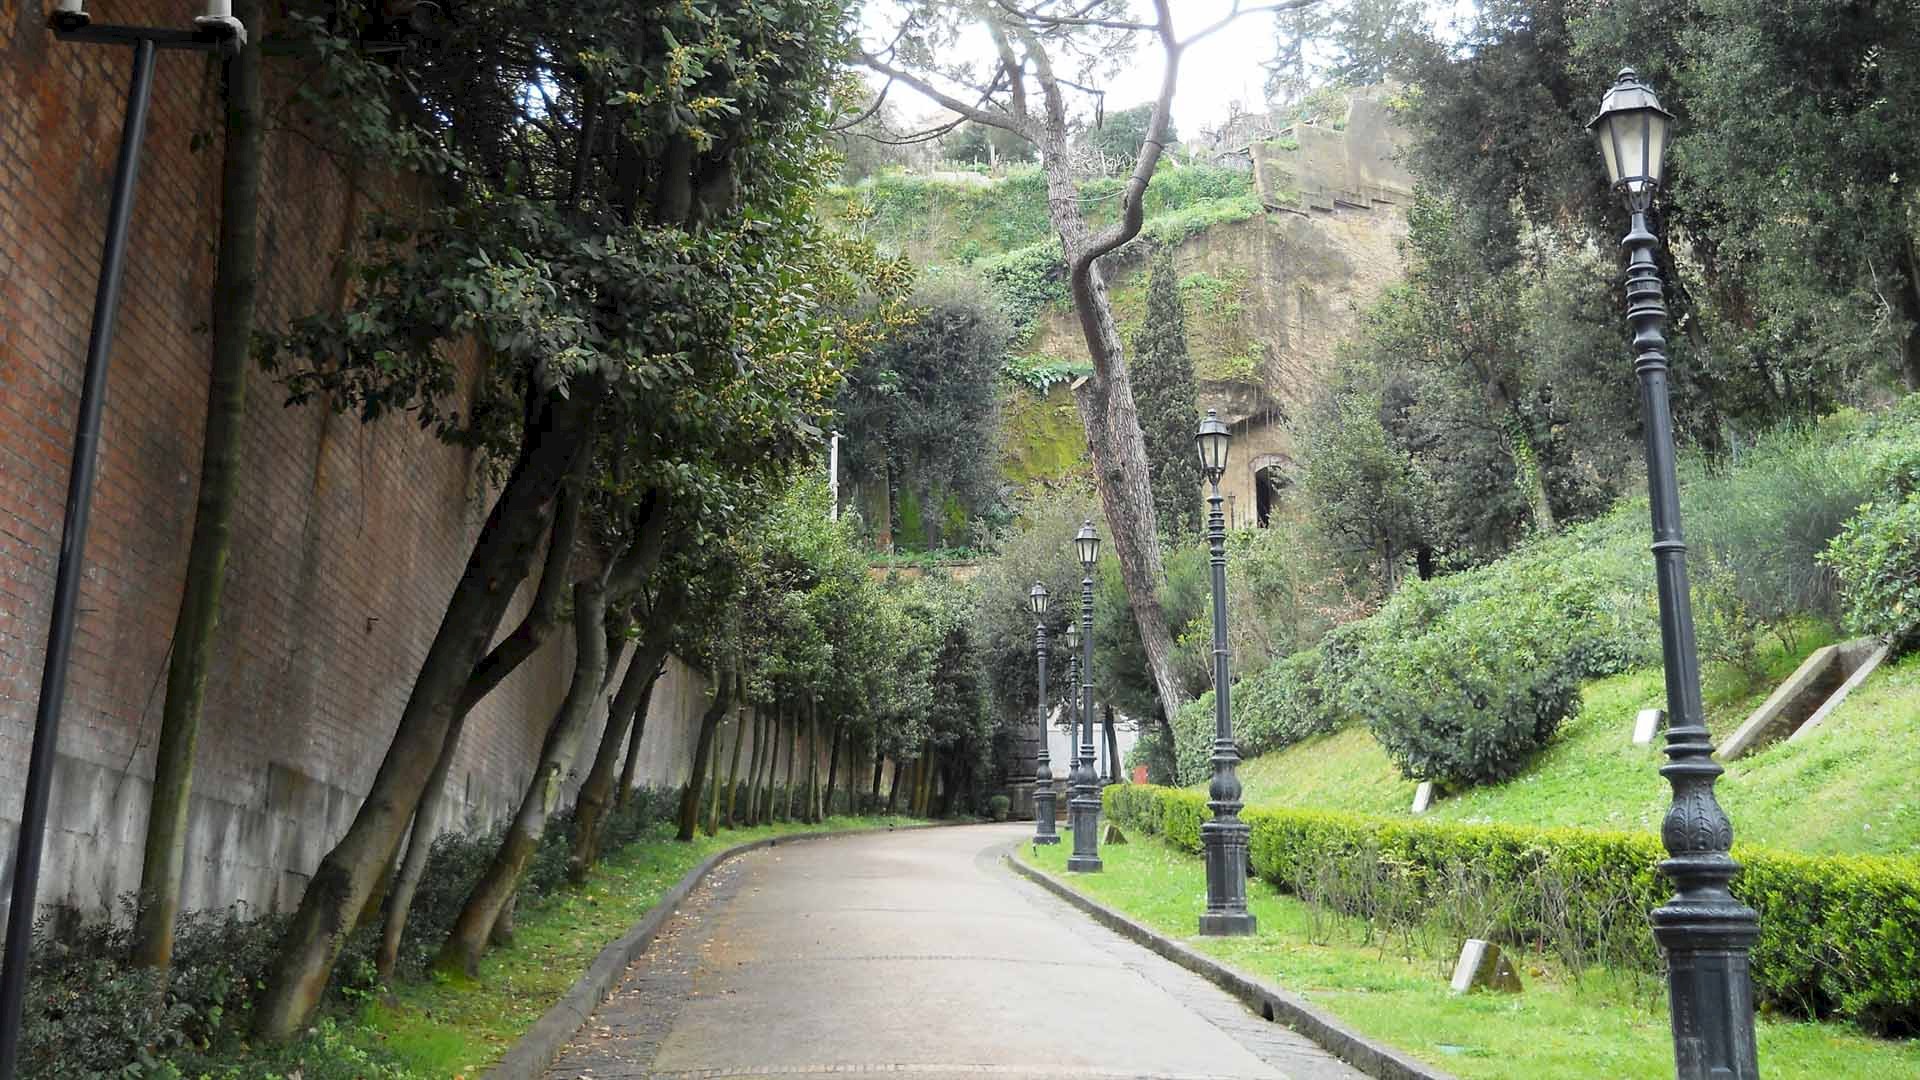 The park of Virgil’s tomb